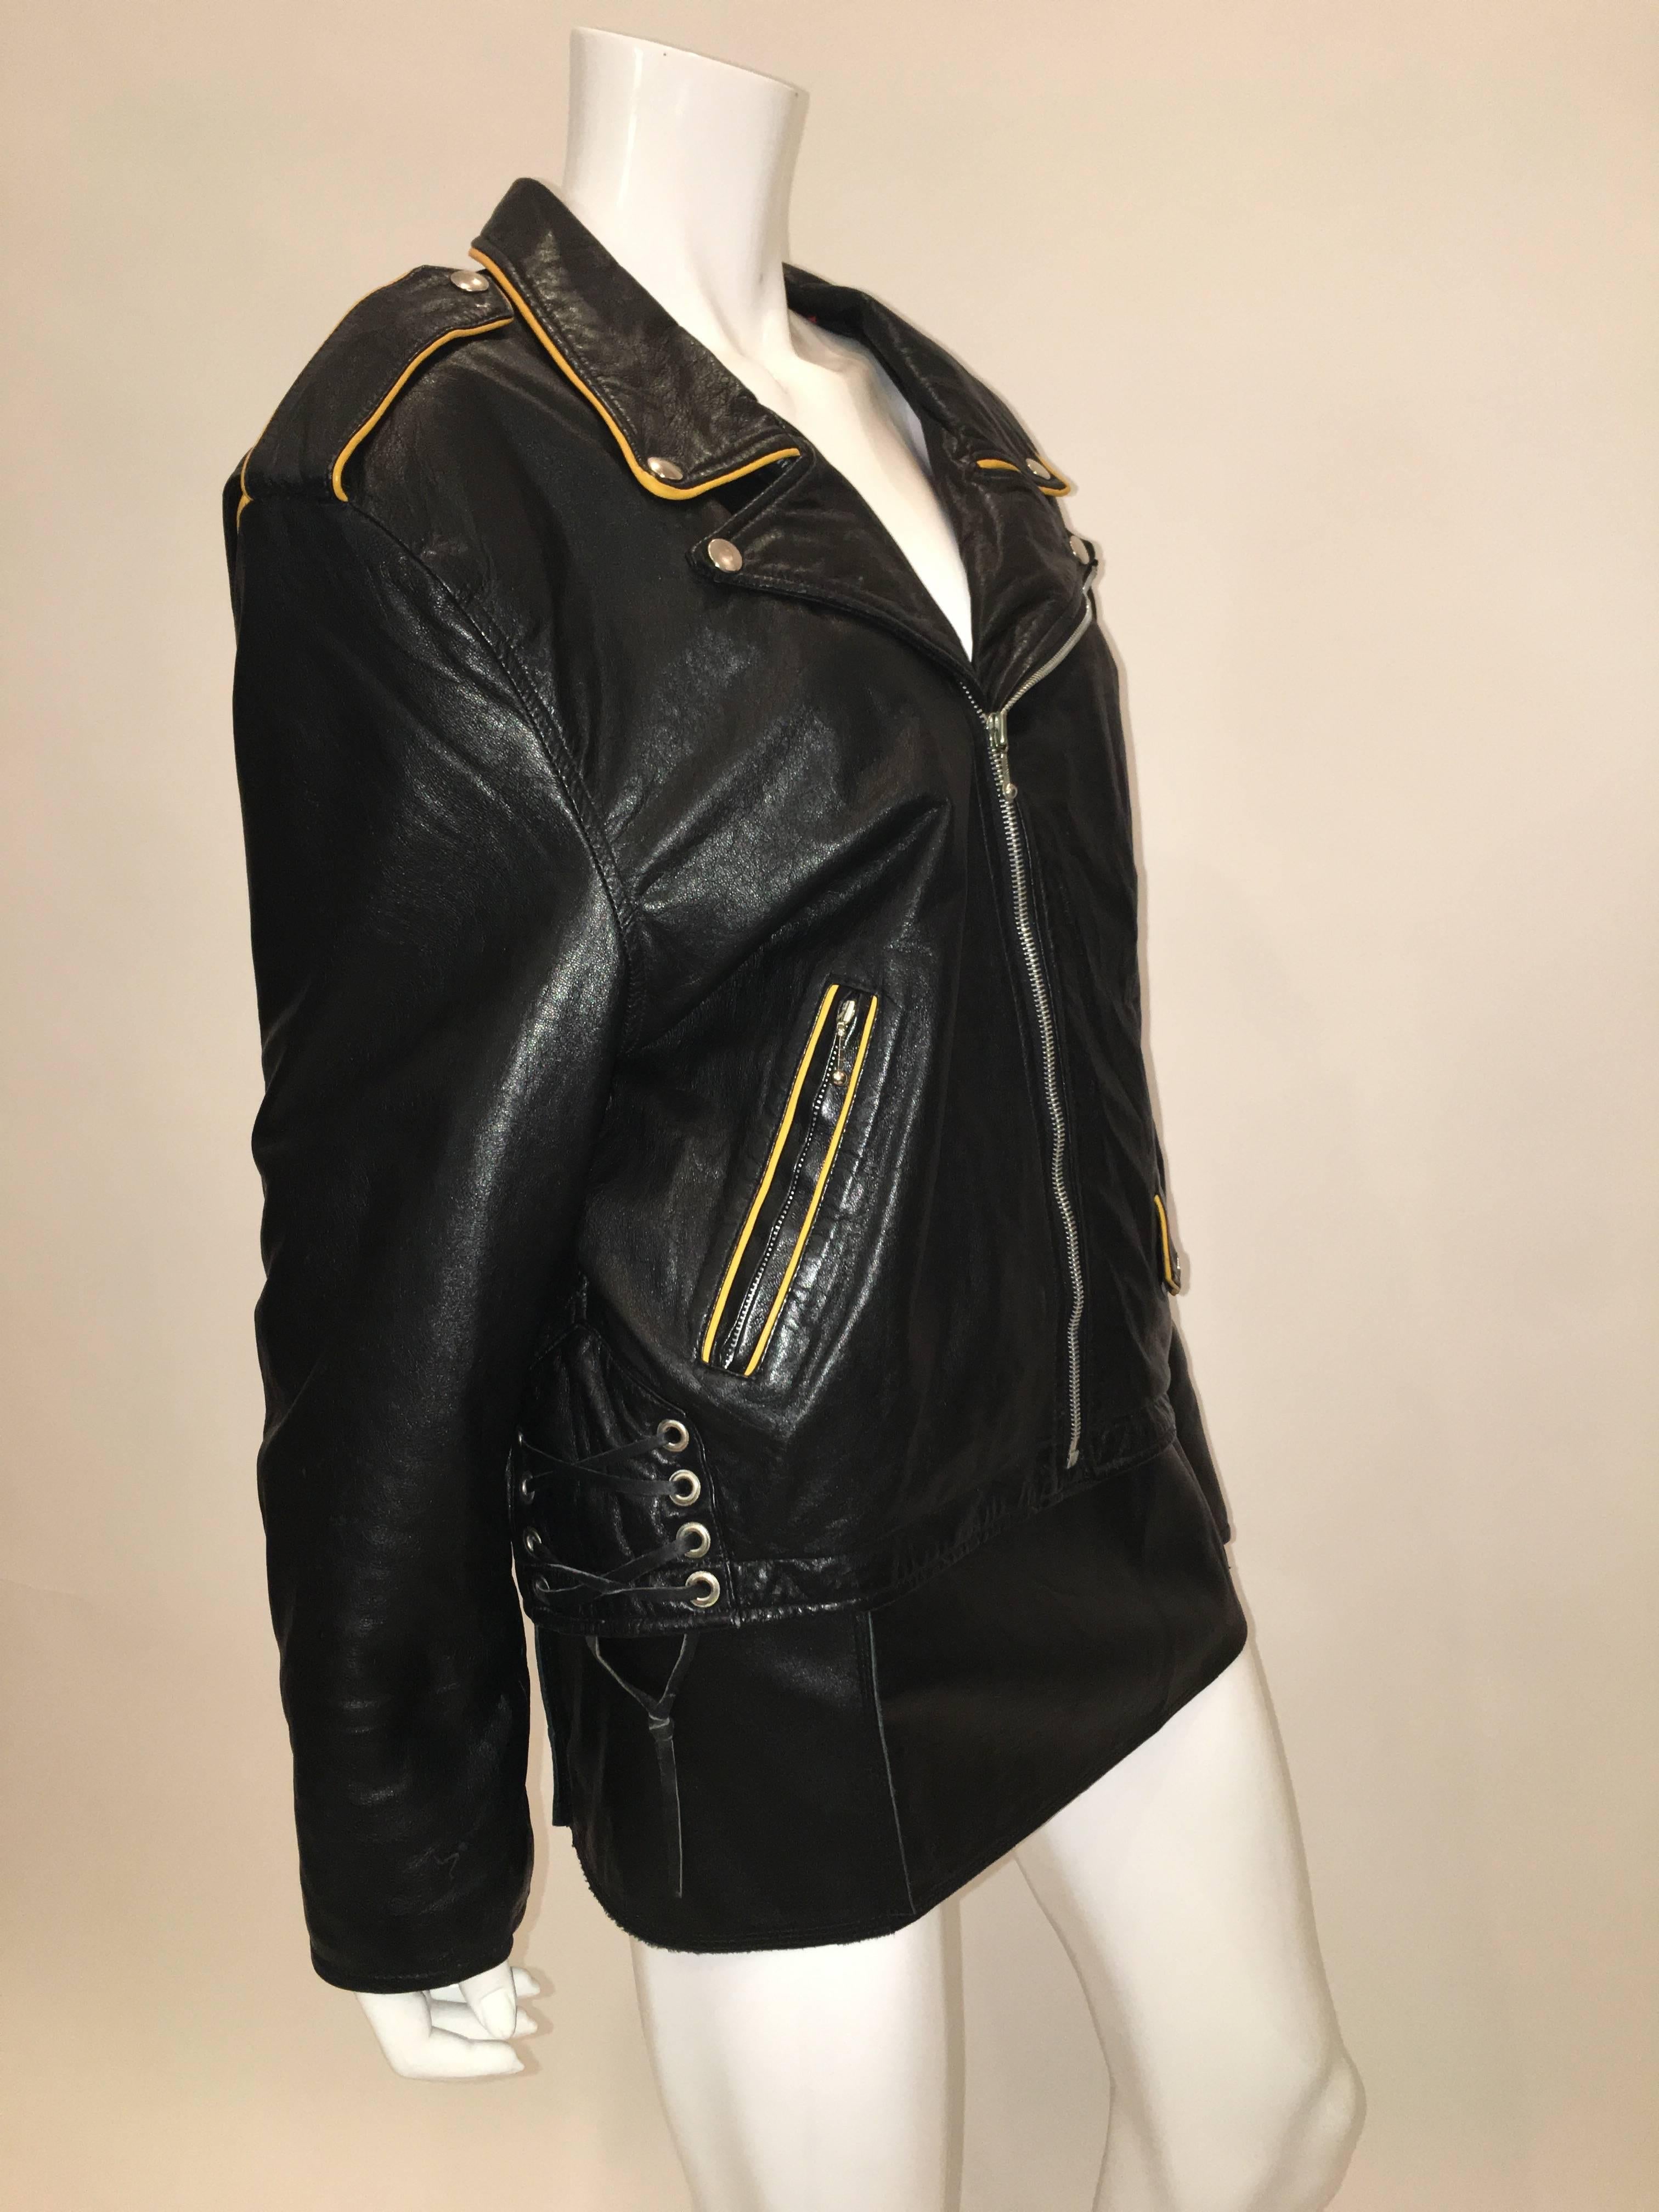 Montana Vintage 1980'S Black Leather Motorcycle Jacket with yellow leather trimming and lace up sides. Jacket has 3 zip pockets, 1 coin pocket and is fully lined. 

*ALL MEASUREMENTS TAKEN FLAT*
Size Label: Large

Shoulder to shoulder: